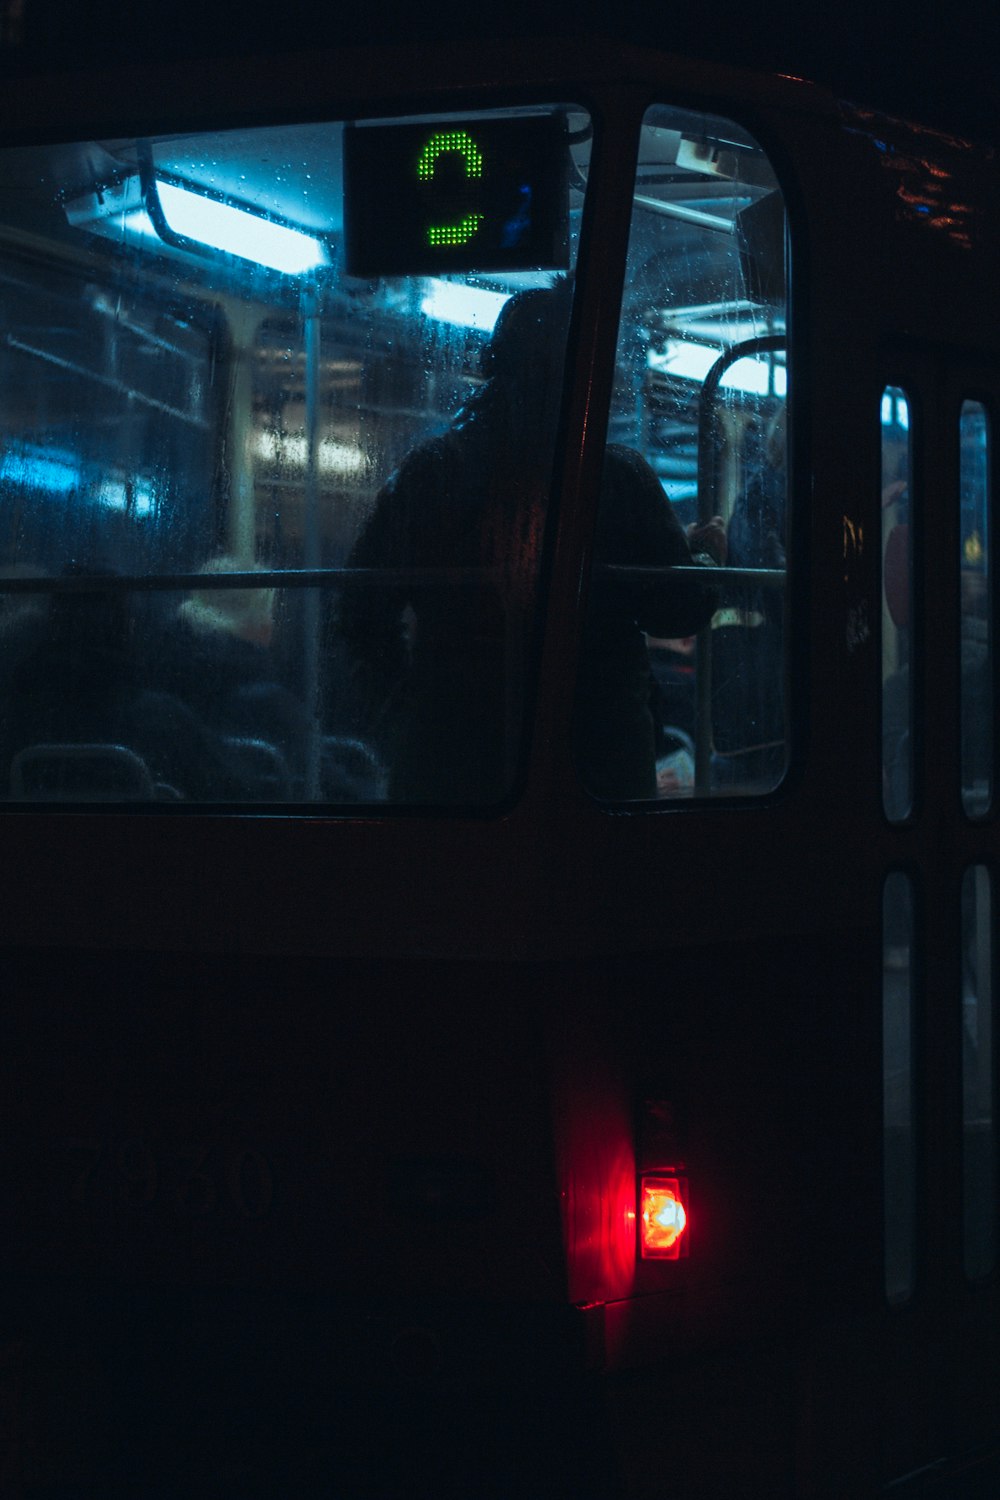 a bus with its lights on in the dark